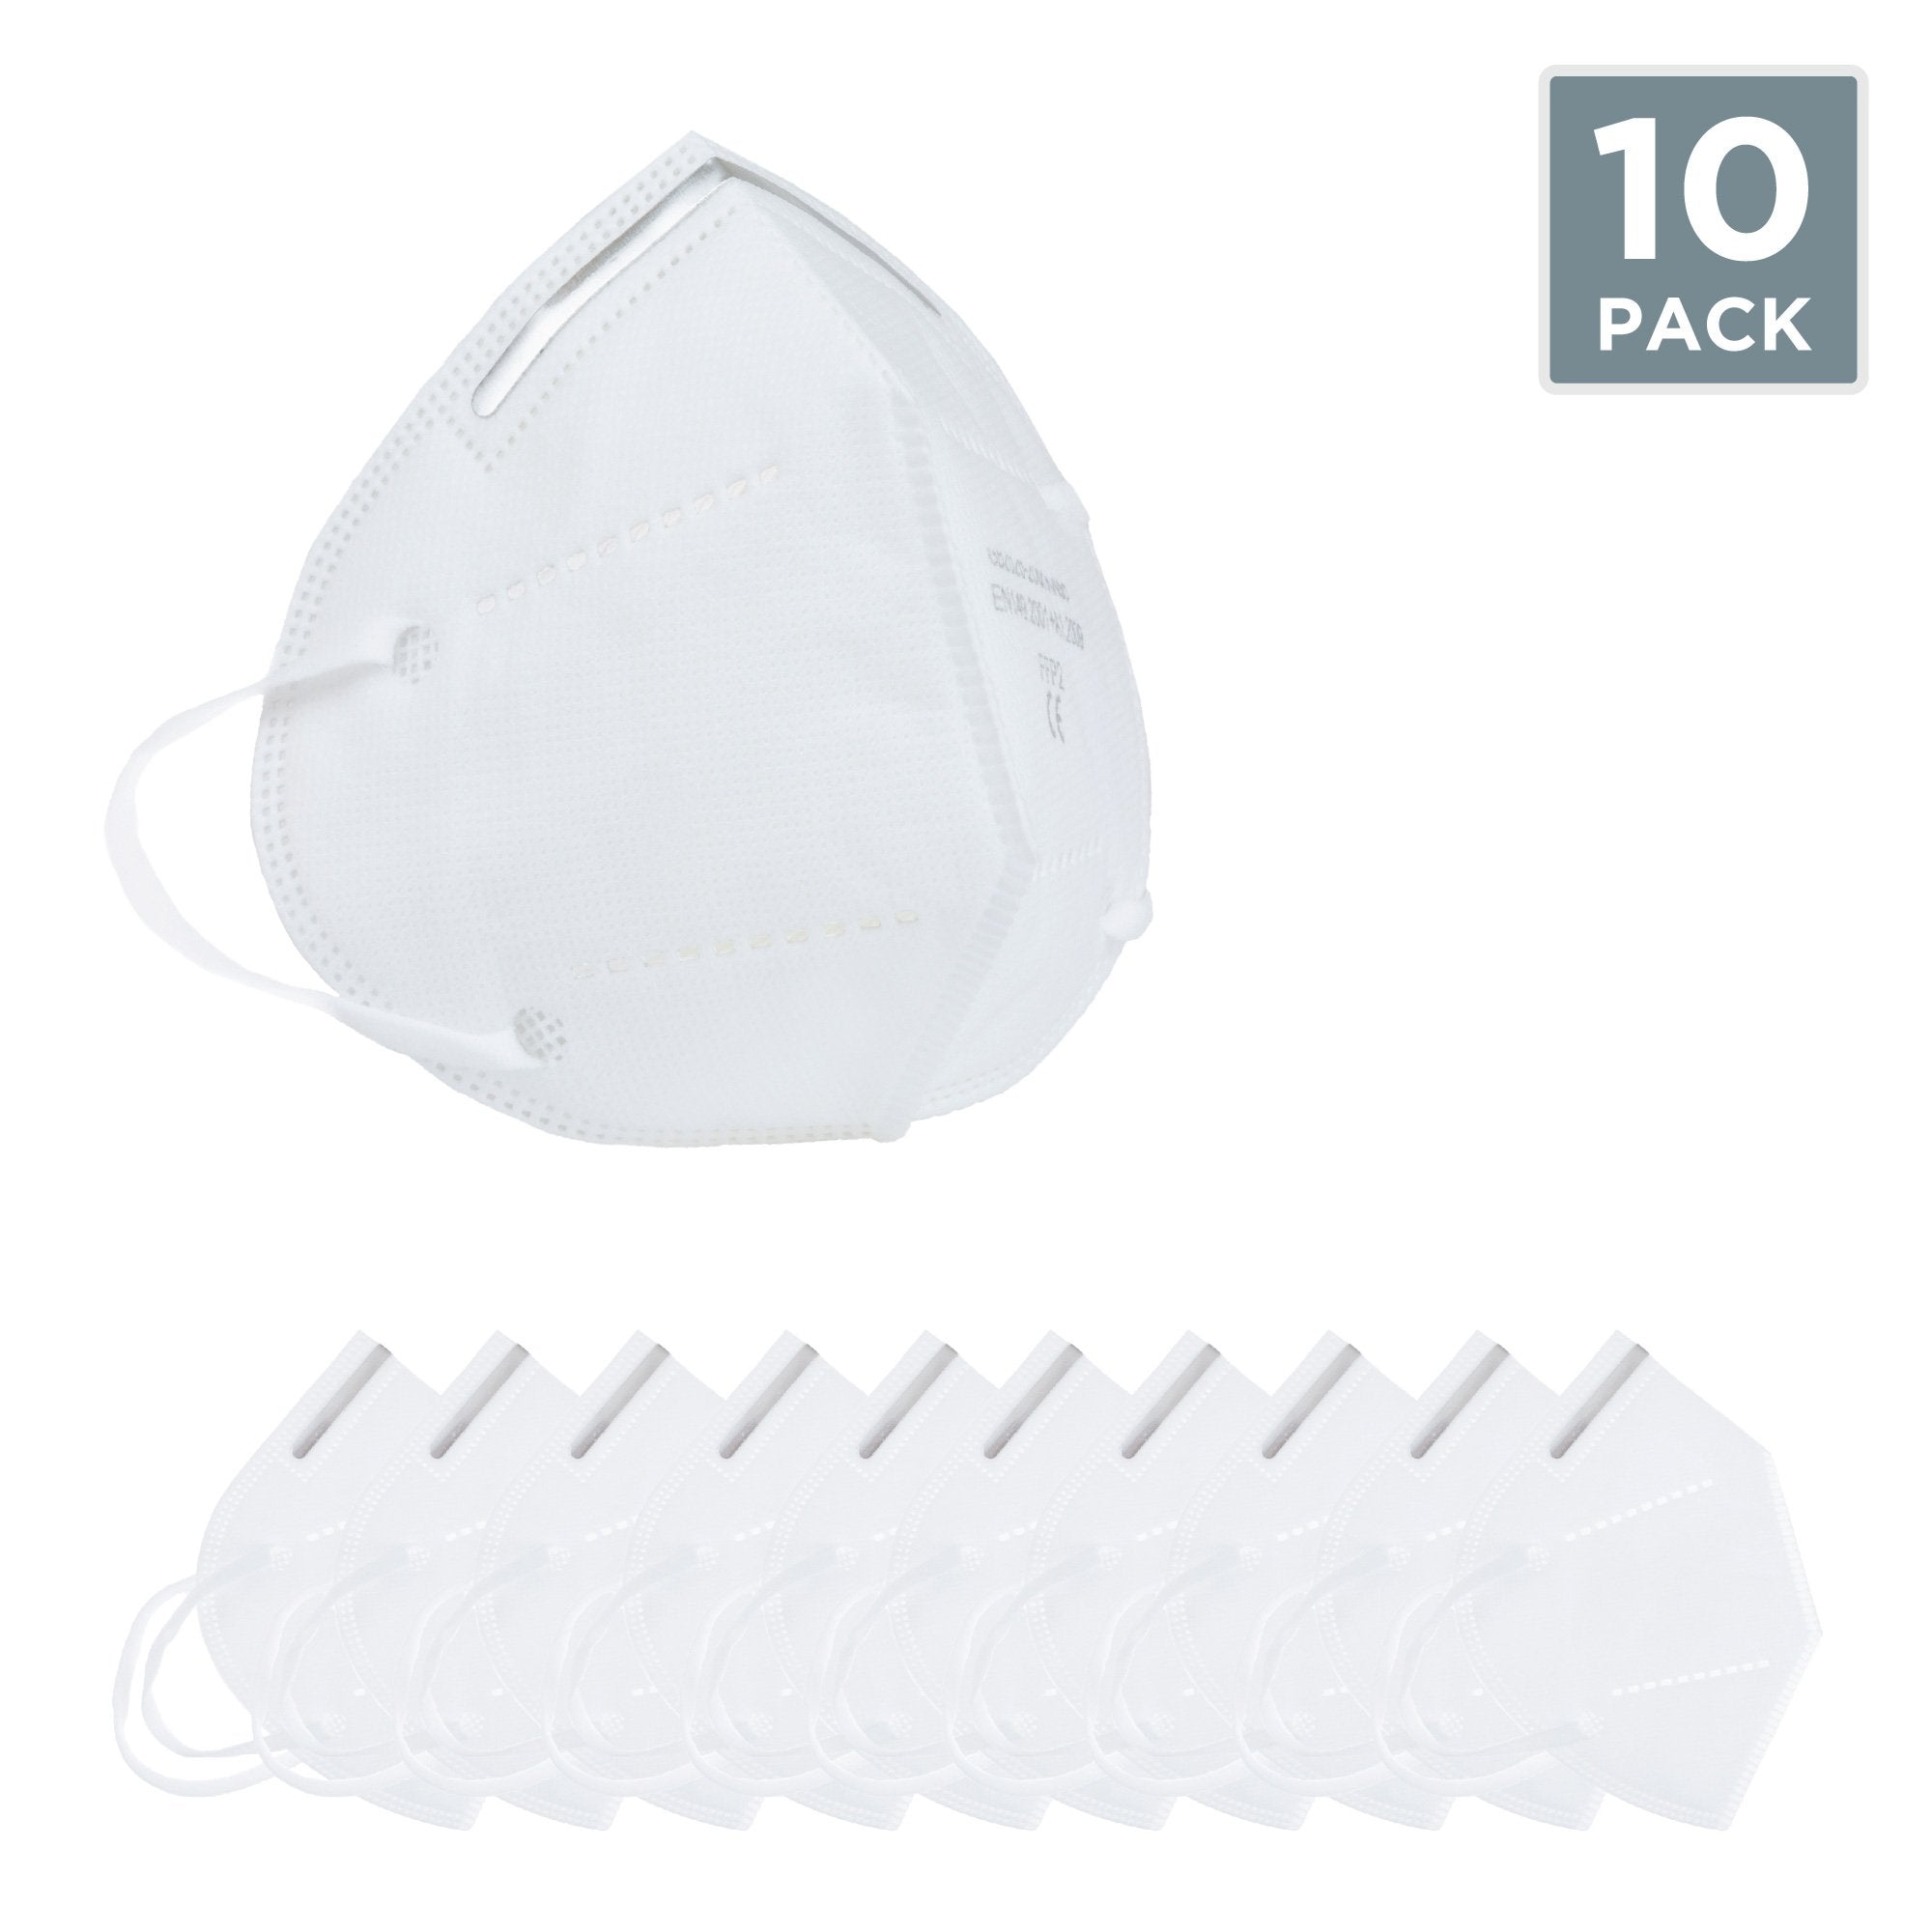 Alarms-DISPOSABLE KN95 FACE MASKS - PERSONAL USE - PACK OF 10 - UPDATED